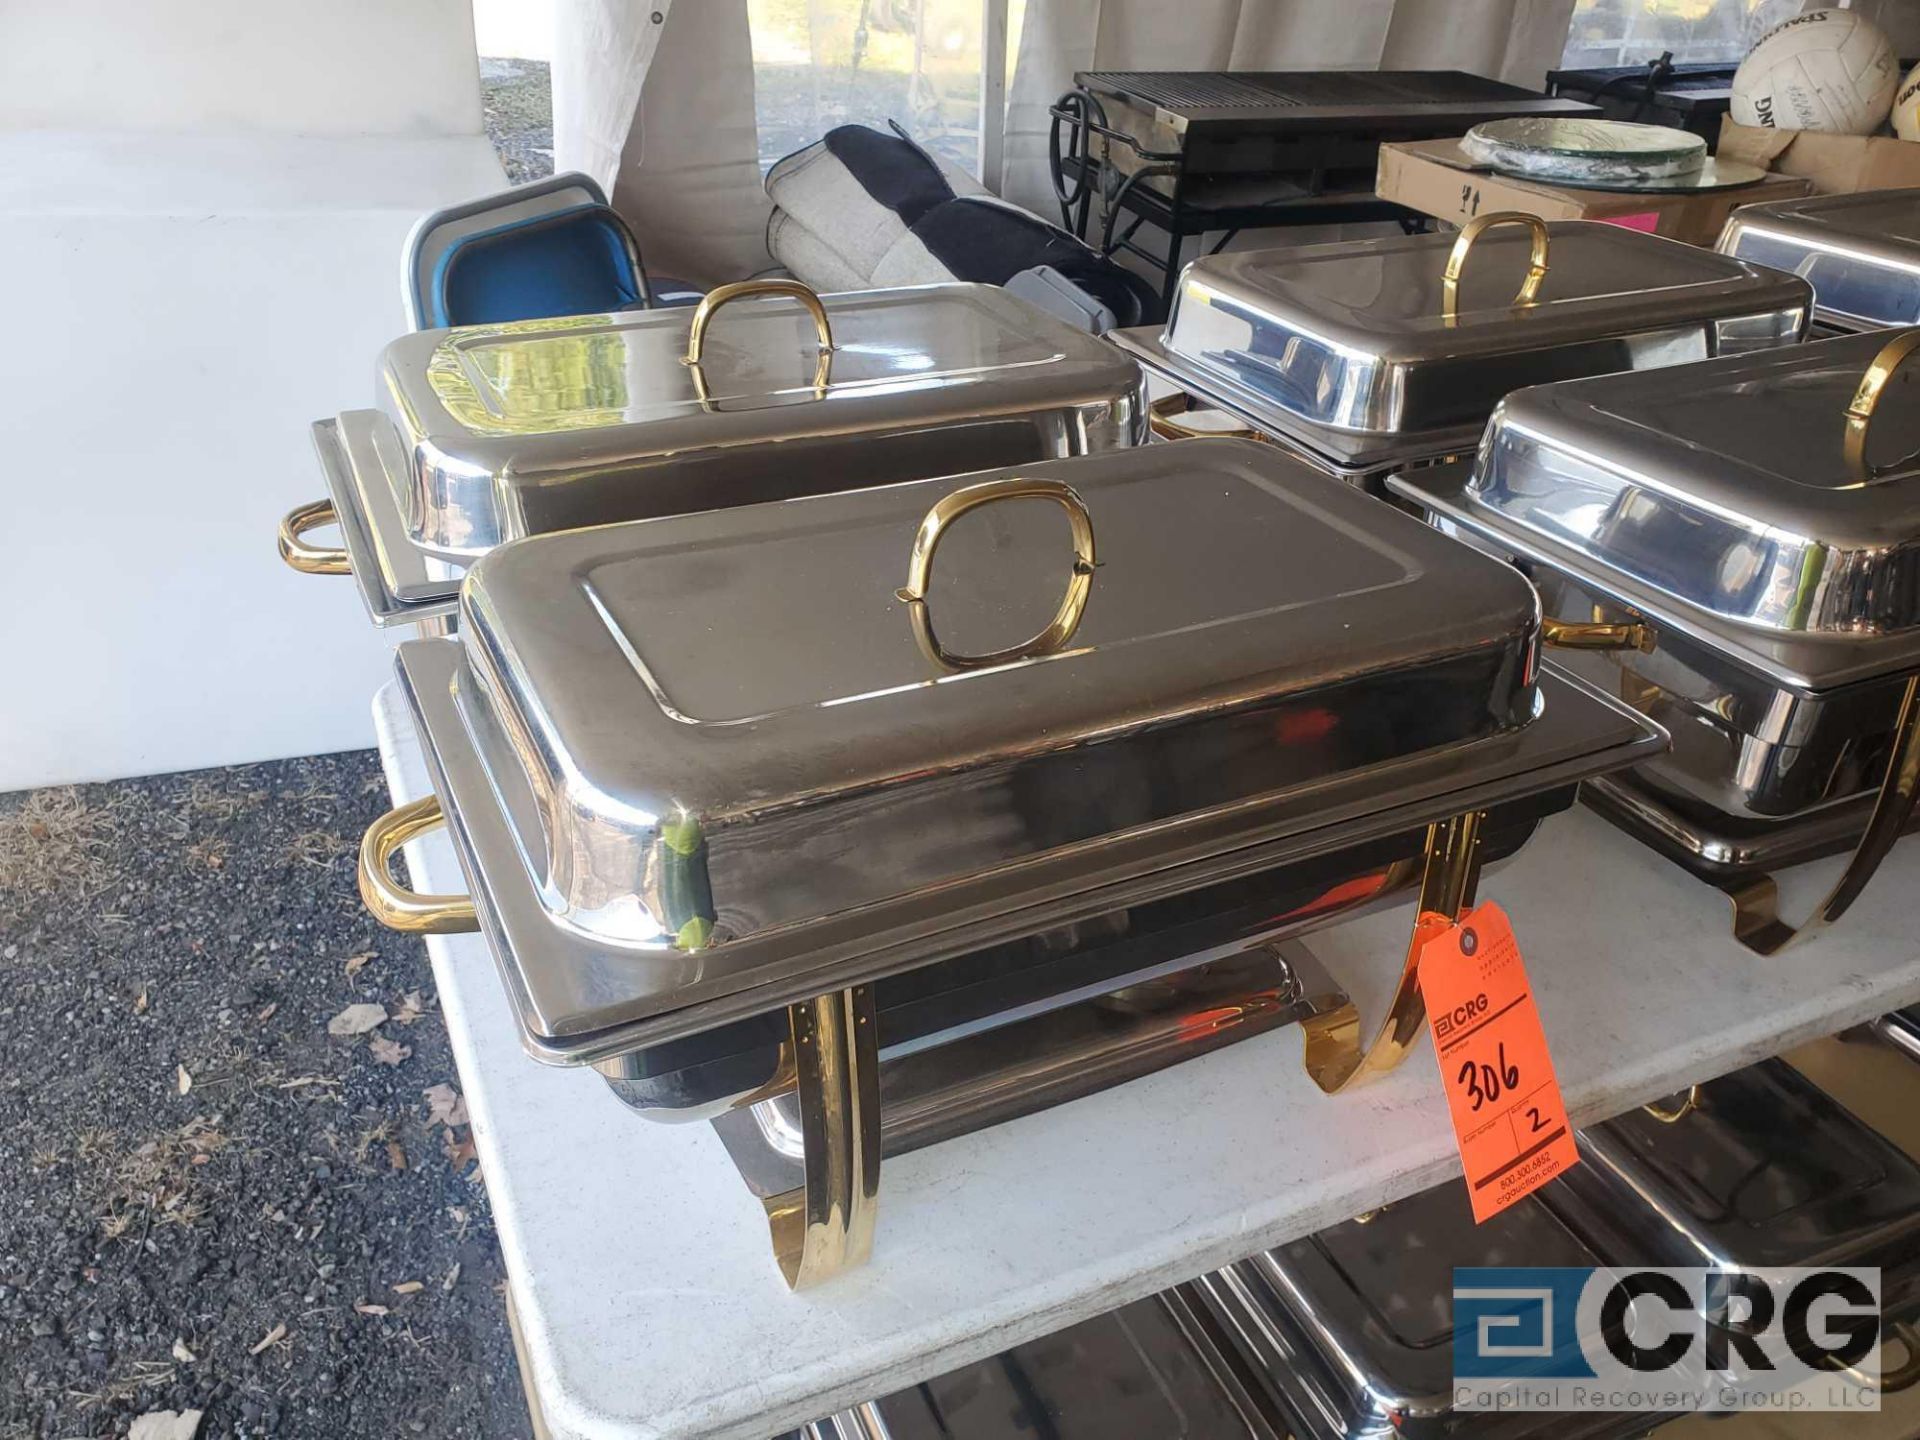 Lot of (2) gold accent fancy chafing dishes with insert pan